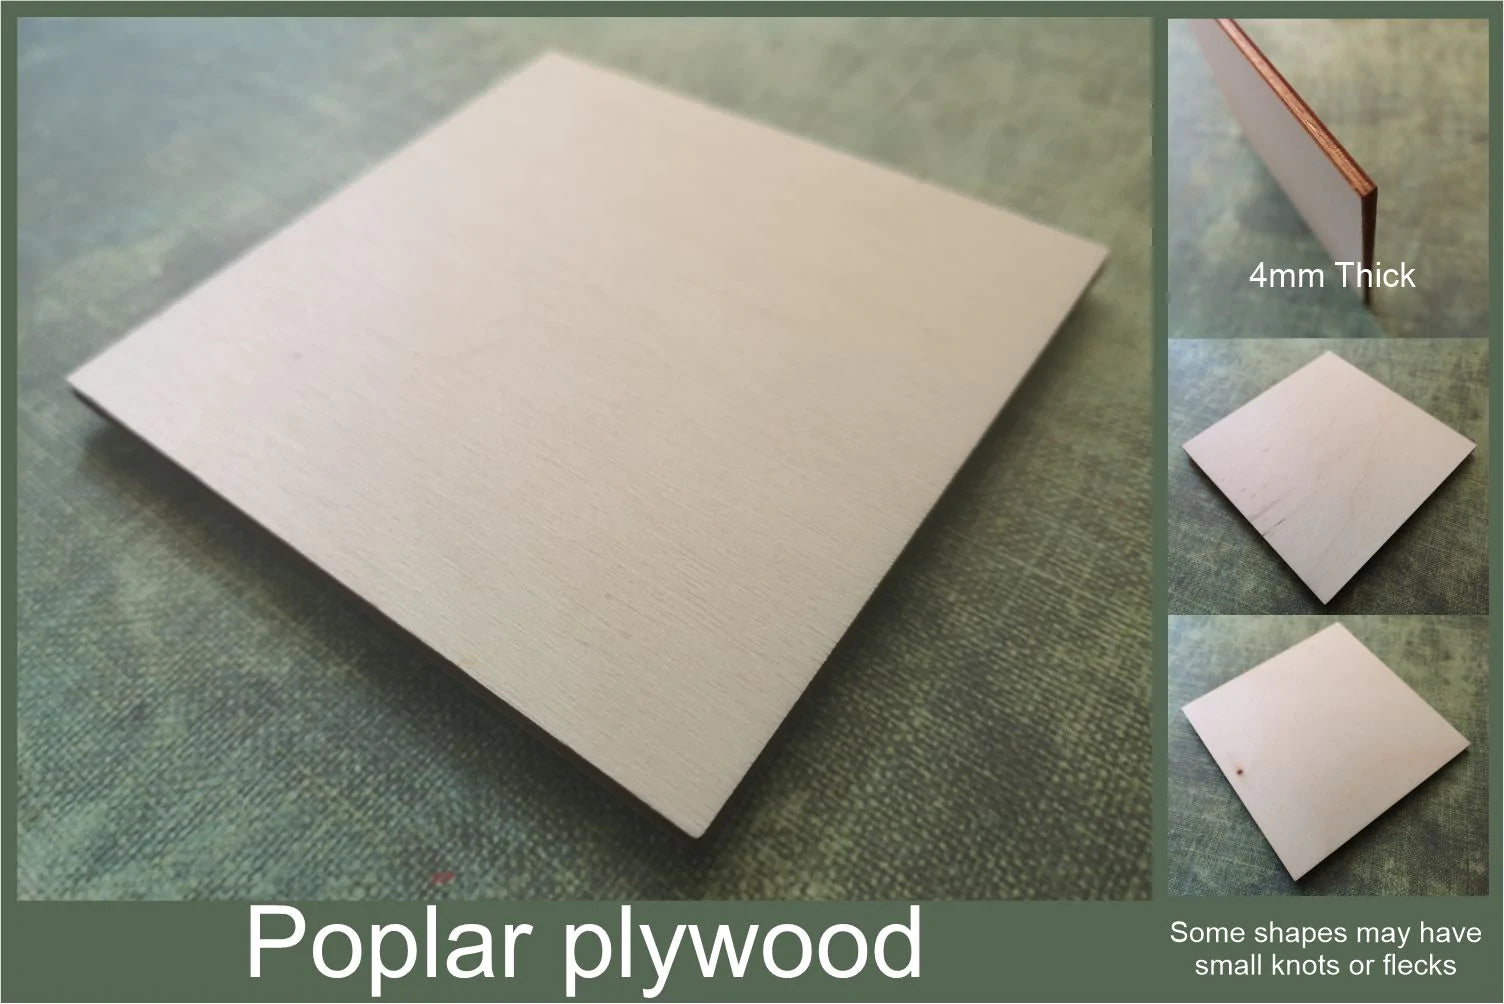 4mm thick poplar plywood used to make the Lily with etched detail cut-outs ready for crafting